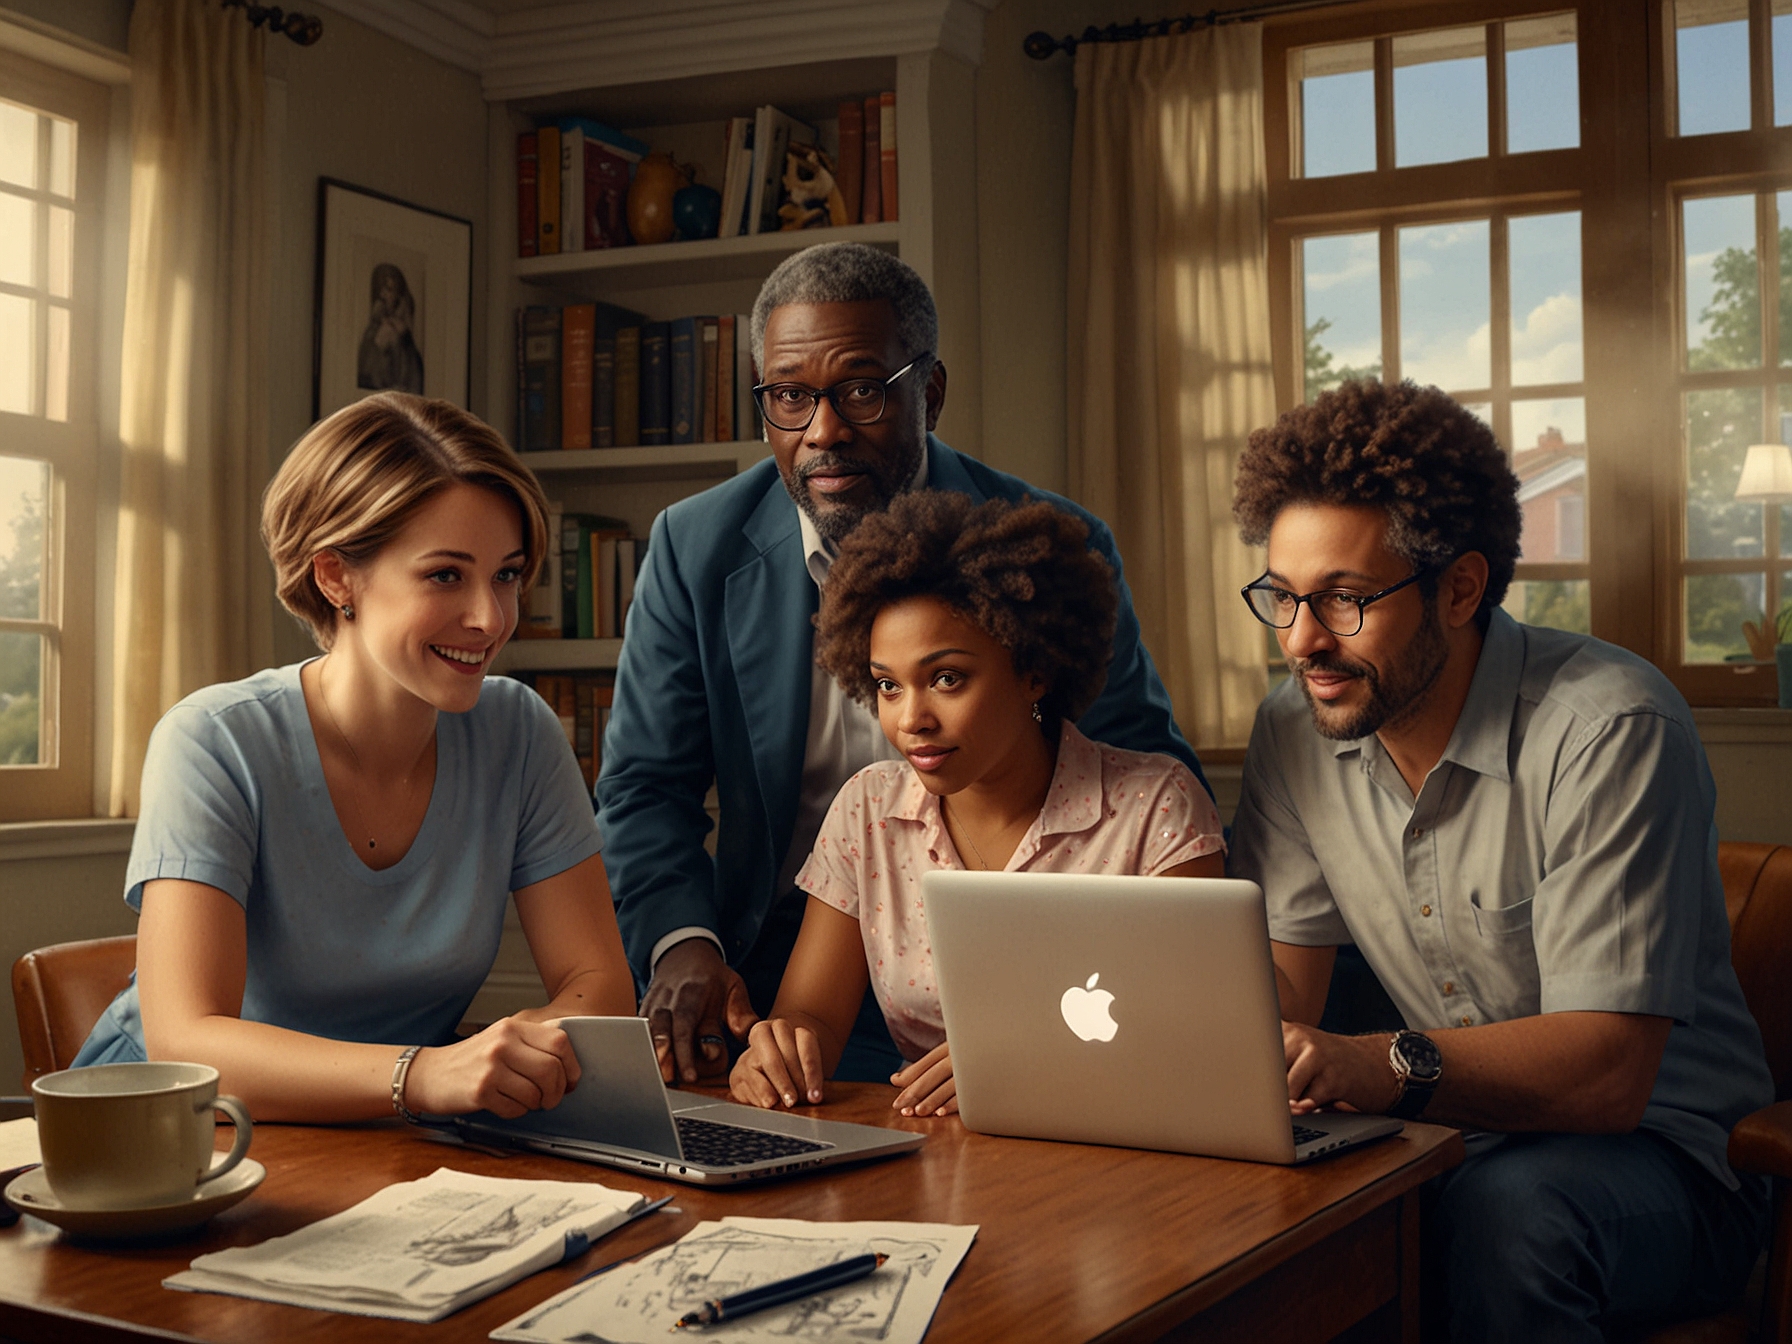 A family gathered around a laptop, watching Mayor of Kingstown Season 3 on Paramount+ using a free trial. The image highlights the convenience of streaming at home.